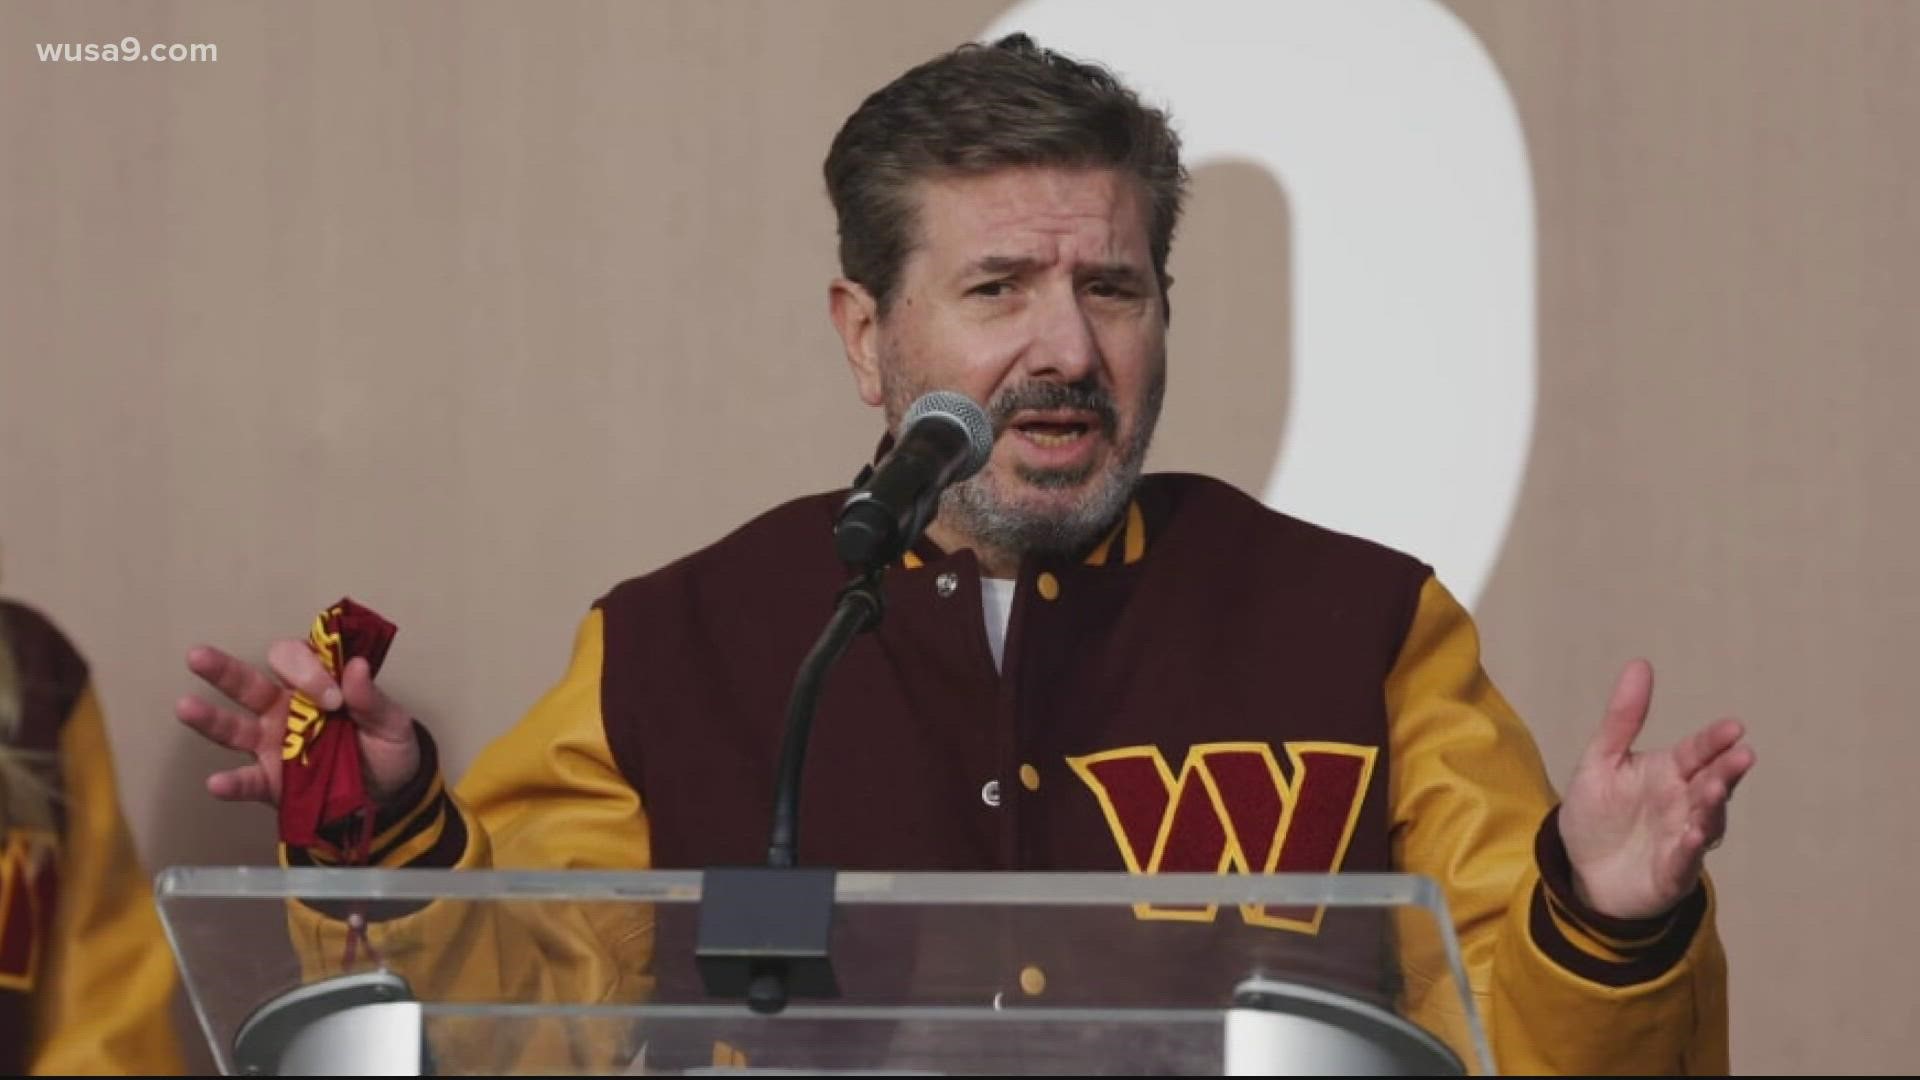 An investigative team will look into allegations of sexual harassment leveled against owner Dan Snyder during a roundtable discussion with Congress